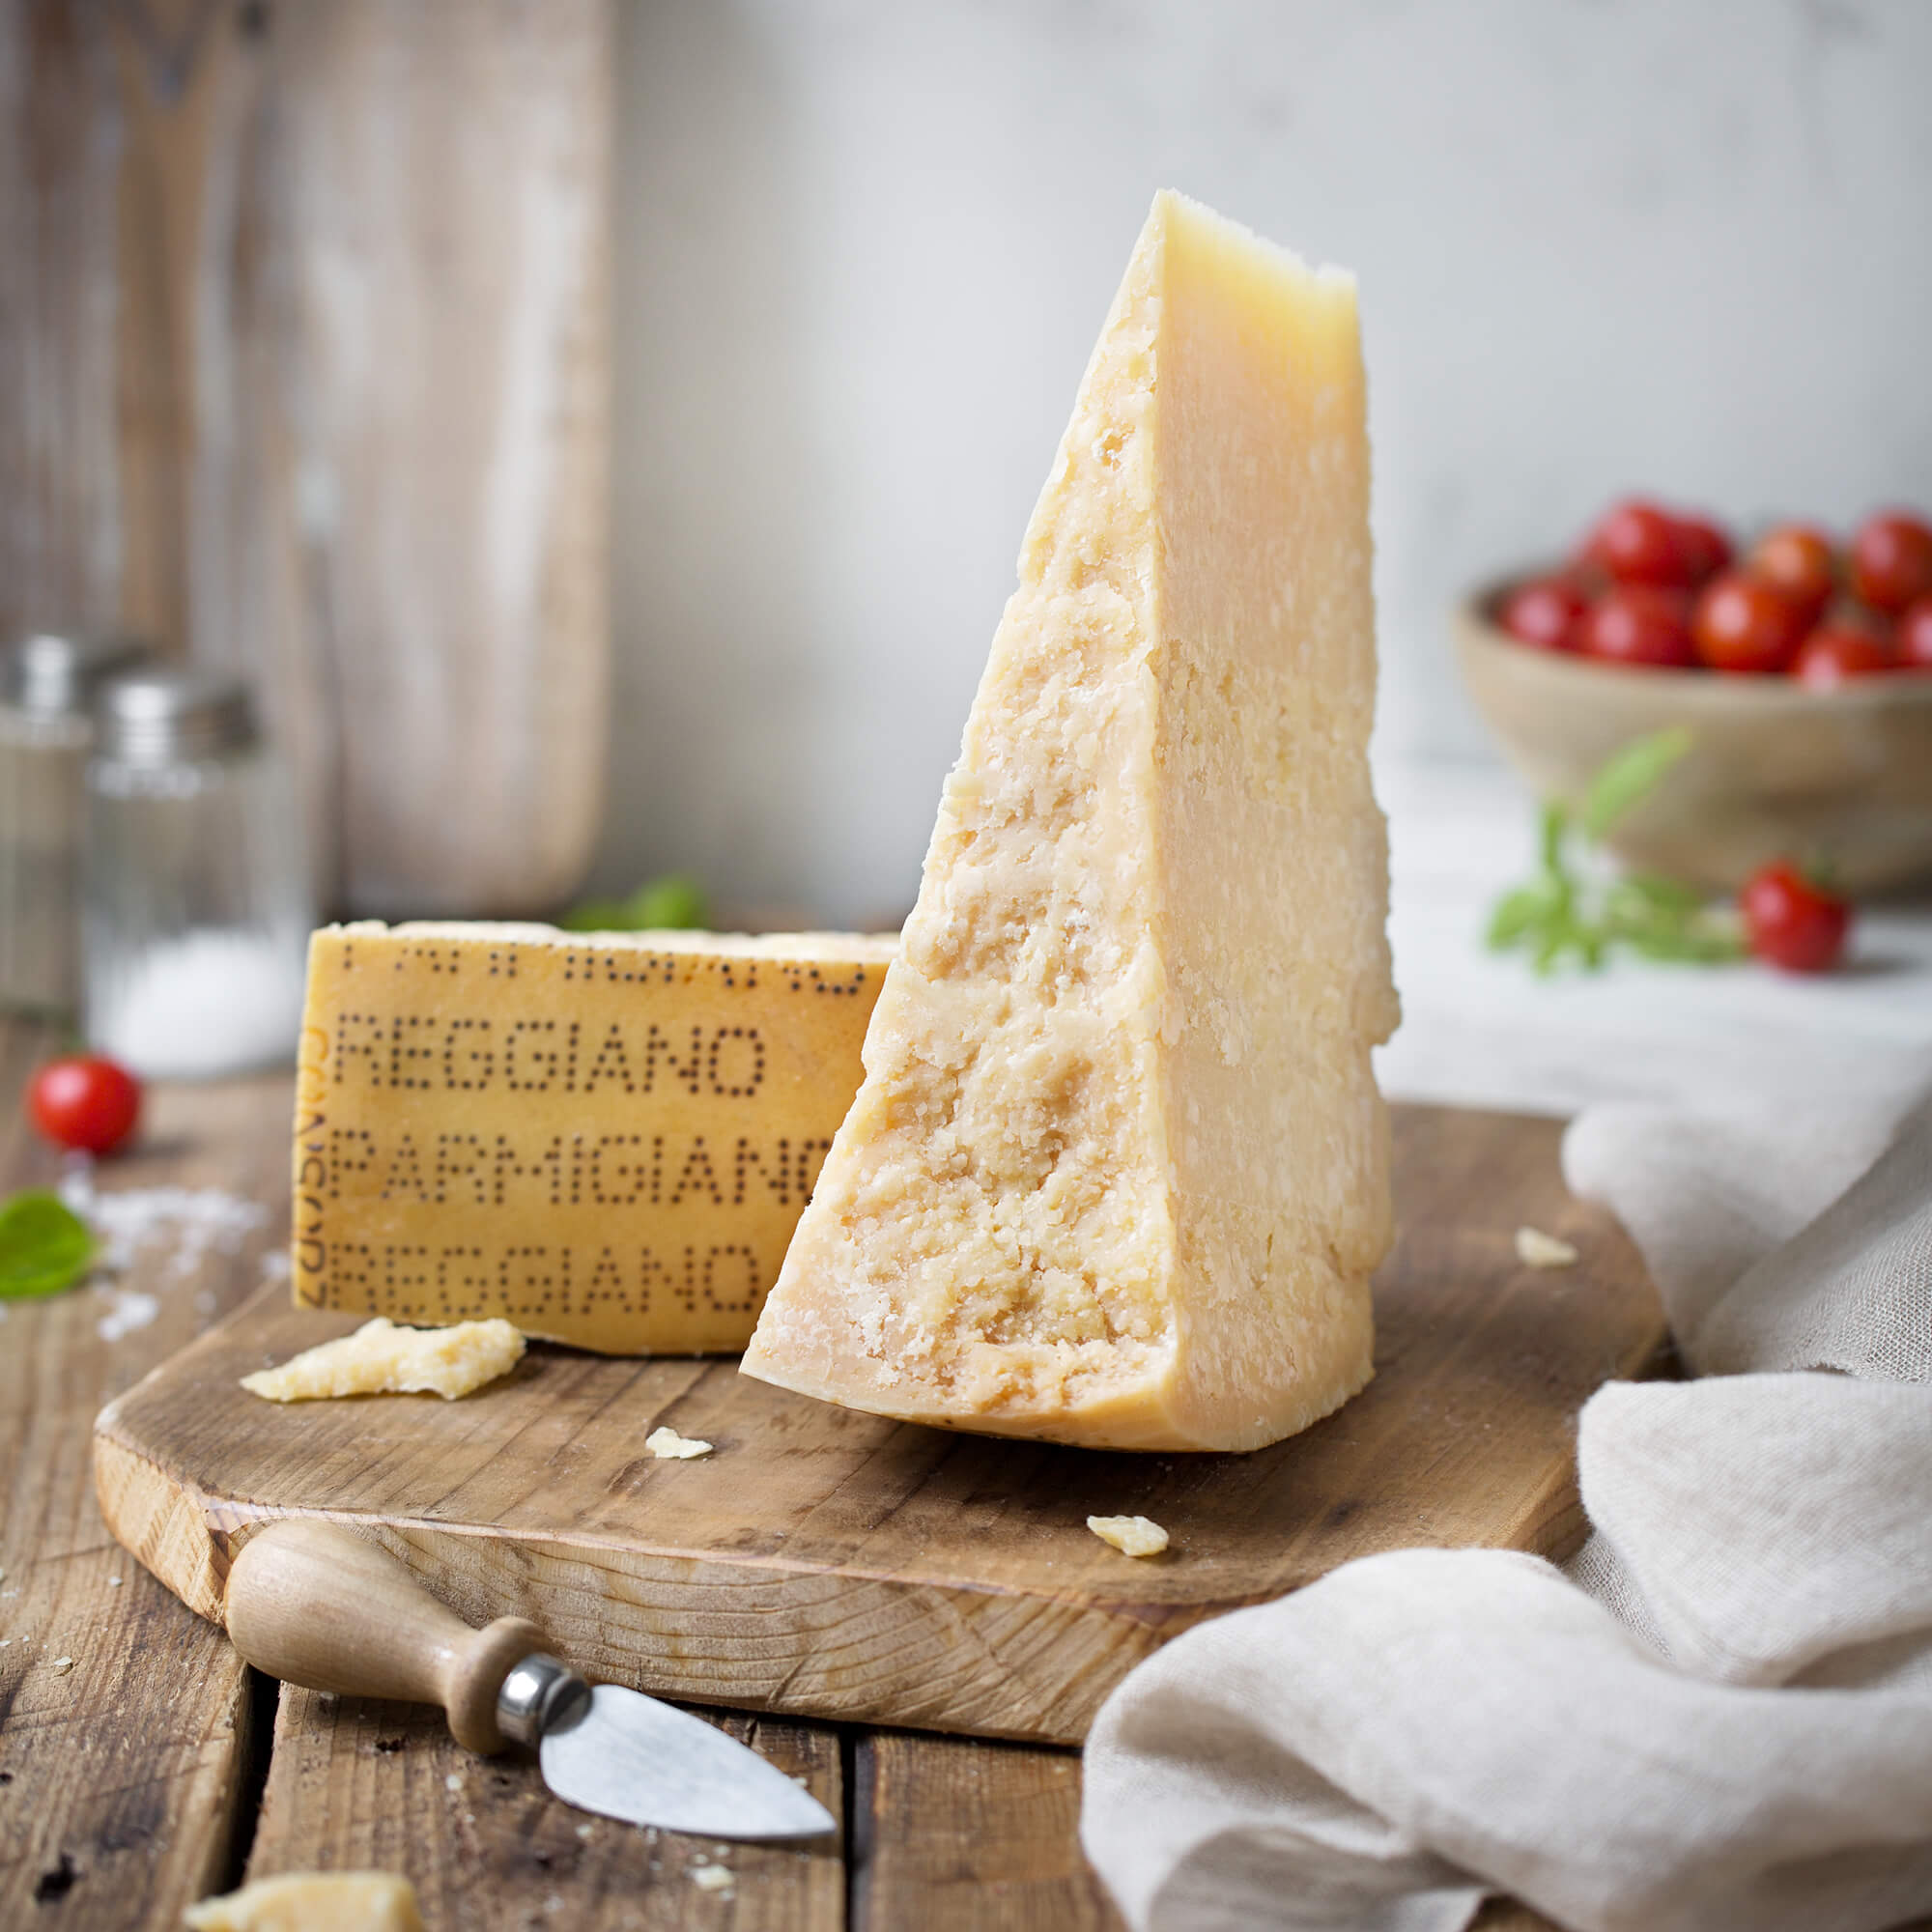 Cheese Replicas - Parmesan Reggiano - for cheese shops – Marche US